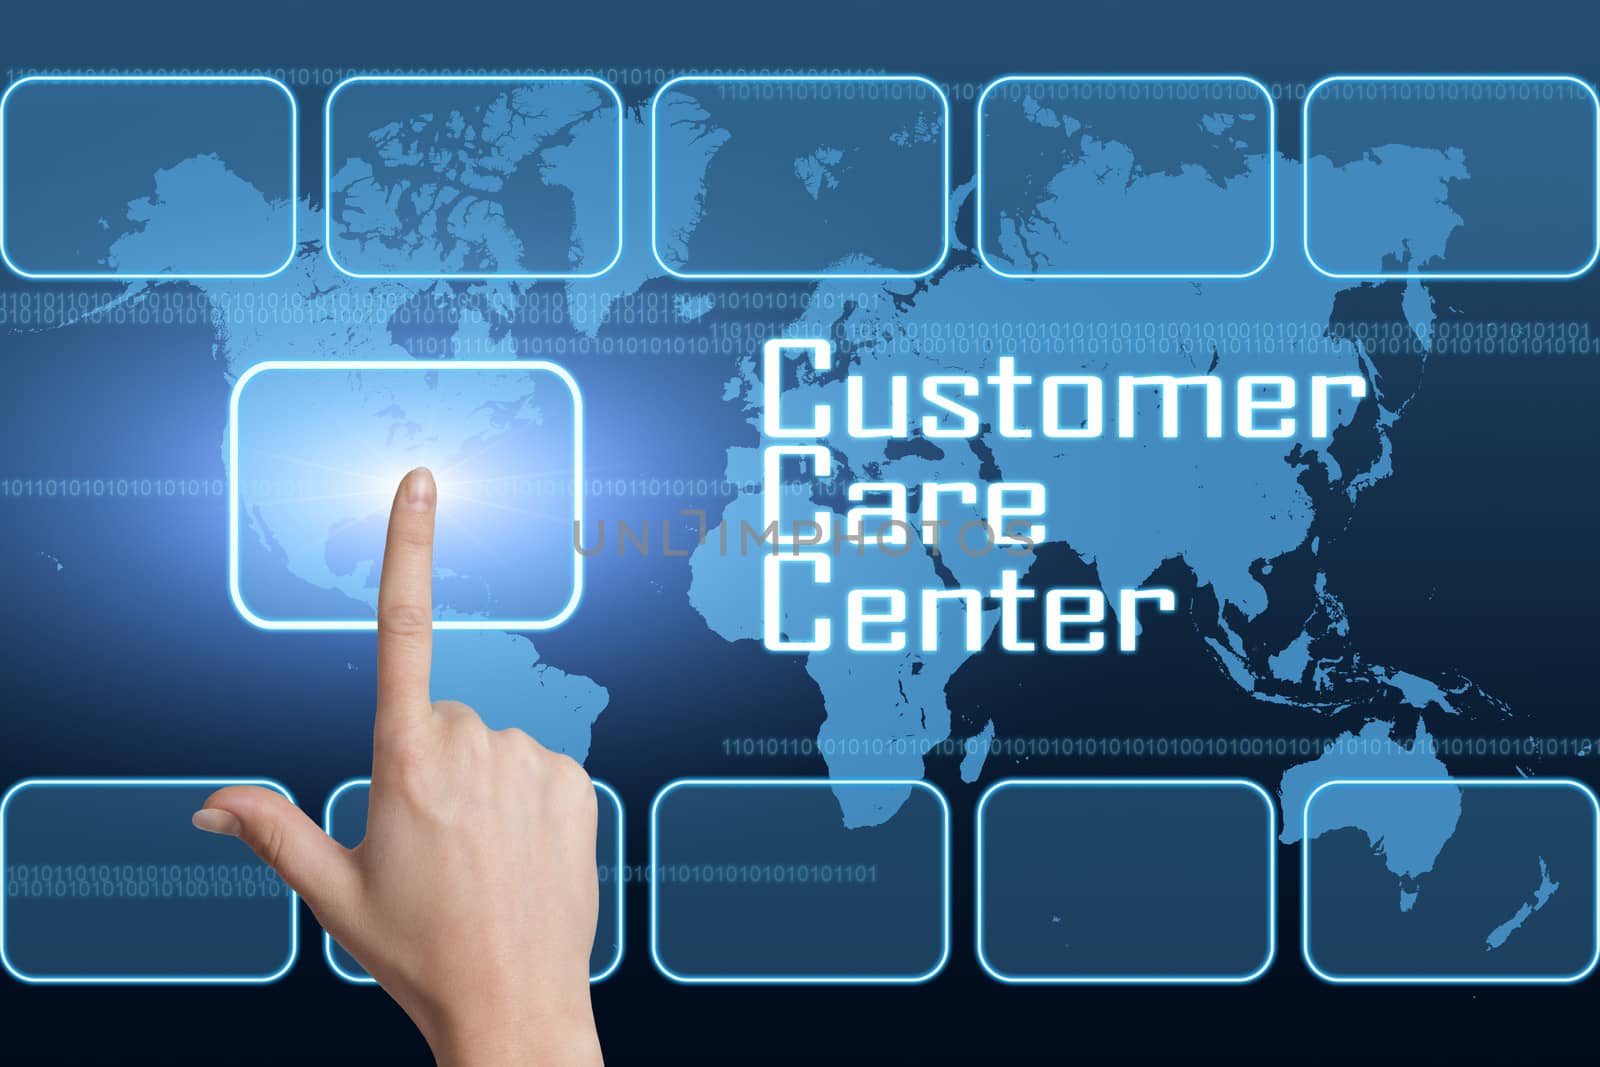 Customer Care Center concept with interface and world map on blue background